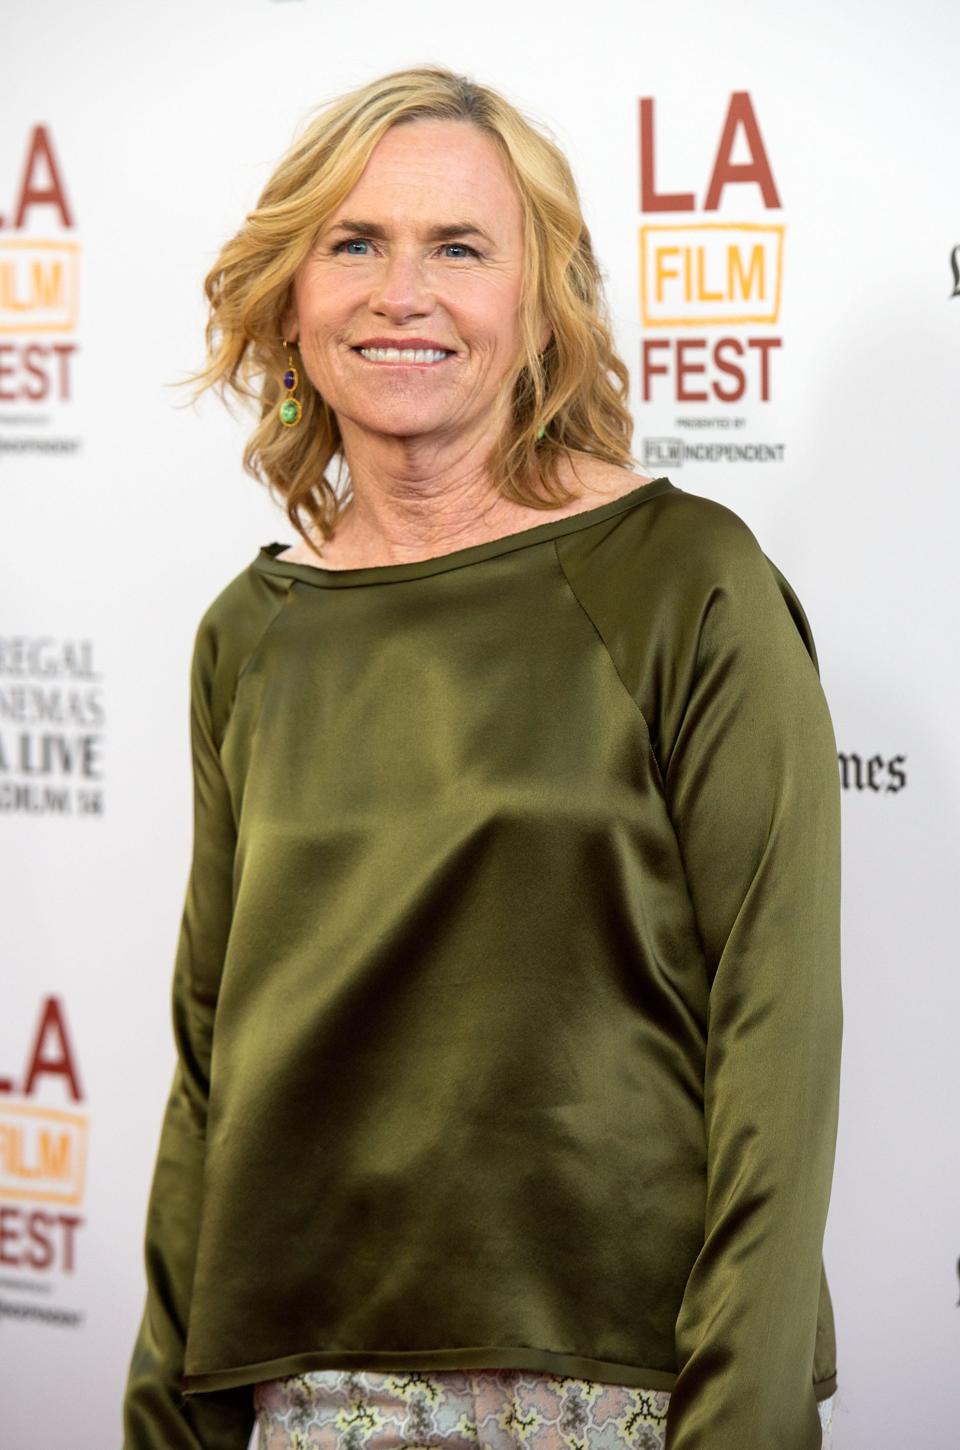 Oscar-nominated actress Amy Madigan, pictured here, will attend this year's Sarasota Film Festival with the movie "Bull Street." Madigan's other credits include "Field of Dreams," "Uncle Buck" and numerous films with her husband, Ed Harris.